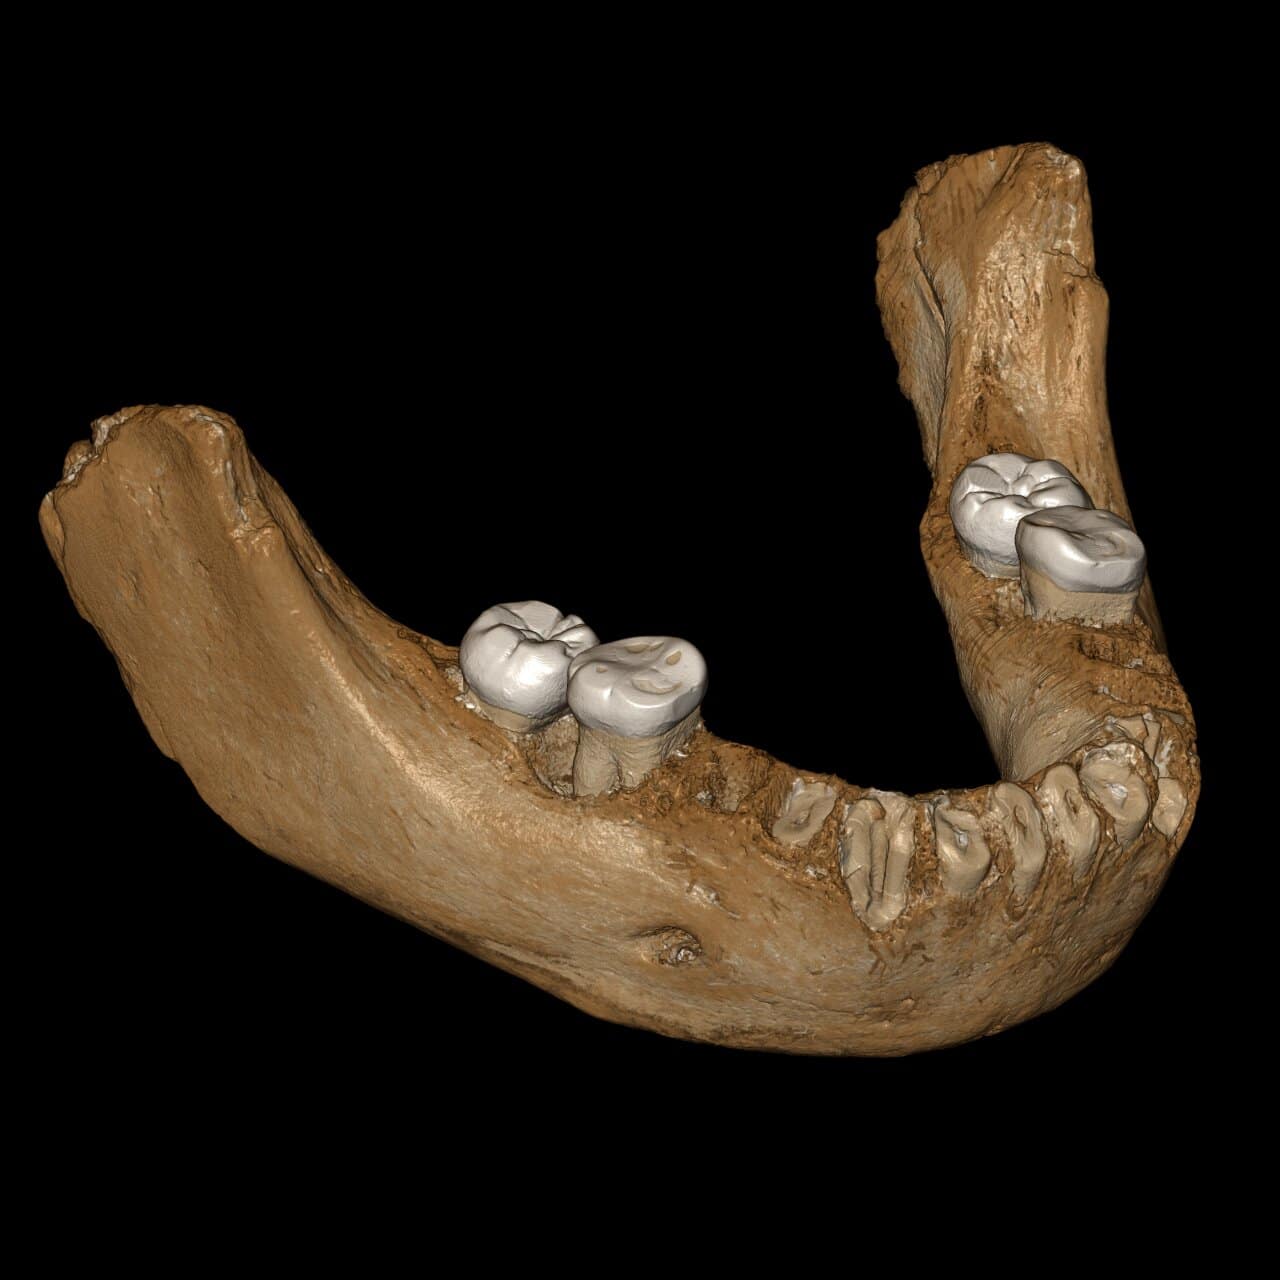 Views of the virtual reconstruction of the Xiahe mandible after digital removal of the adhering carbonate crust. The mandible is so well preserved that it allows for a virtual reconstruction of the two sides of the mandible. Mirrored parts are in grey. Credit: Jean-Jacques Hublin, MPI-EVA, Leipzig